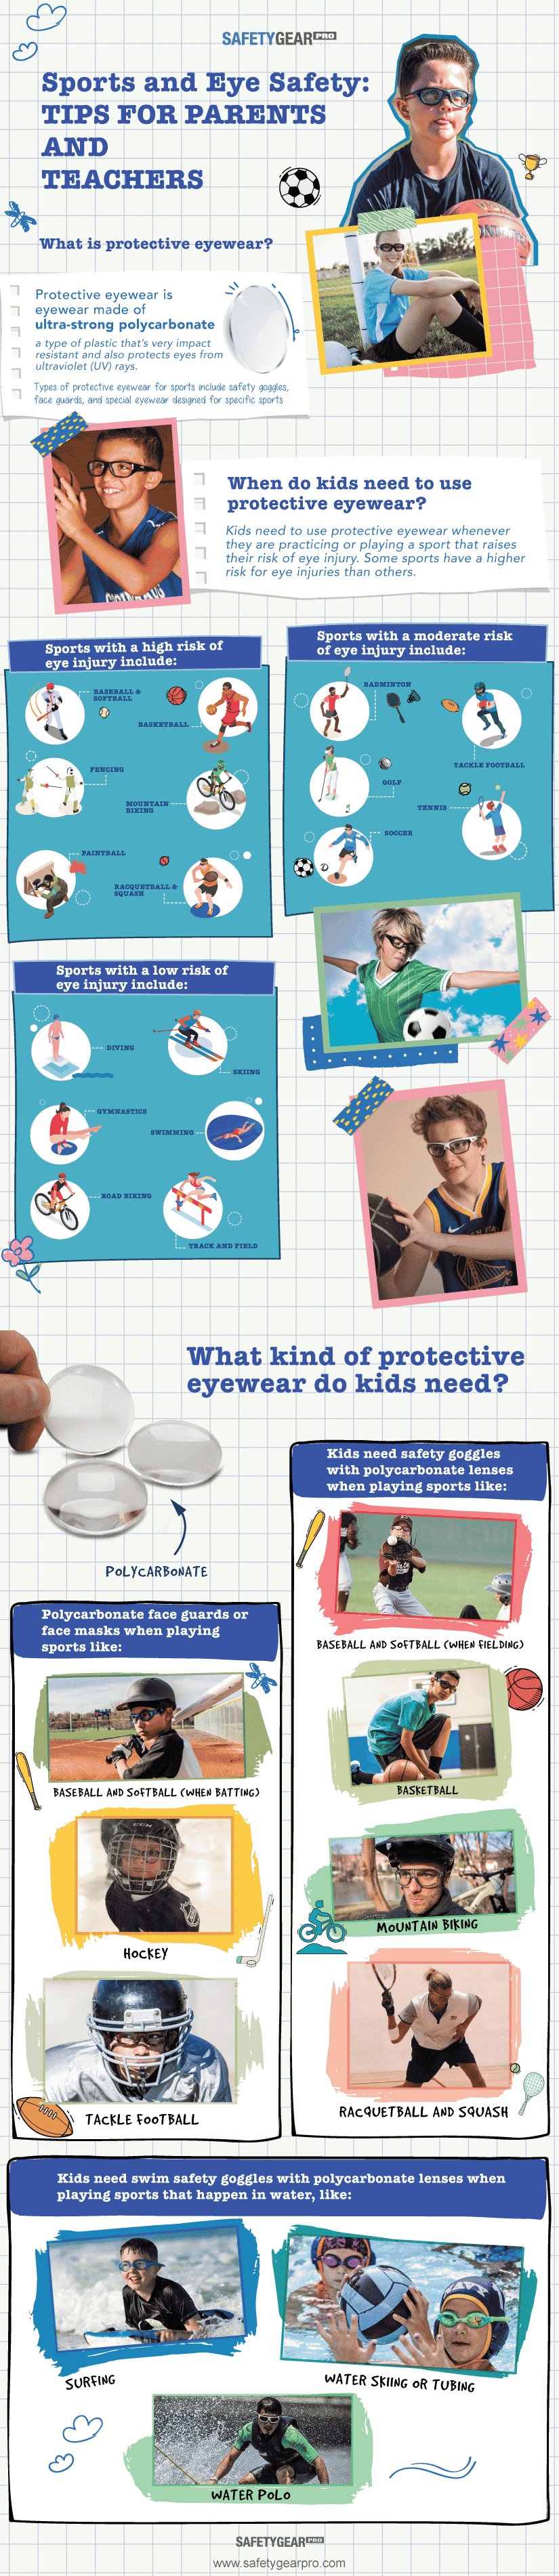 Sports and Eye Safety: Tips For Parents and Teachers Infographic